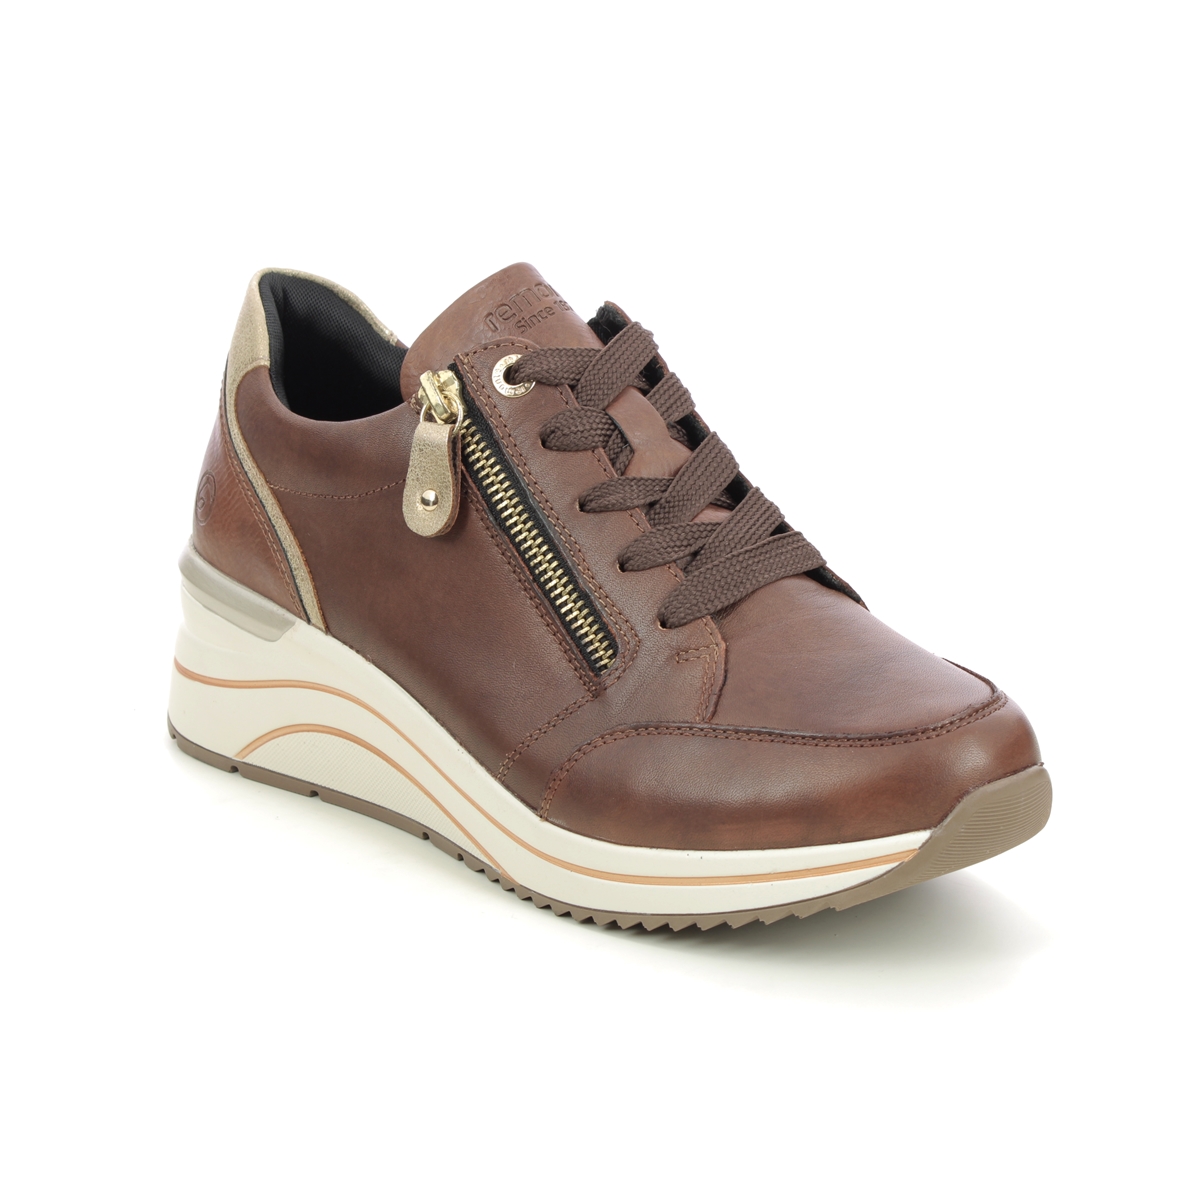 Remonte Ranzip Wedge Tan Leather Womens Trainers D0T03-22 In Size 38 In Plain Tan Leather